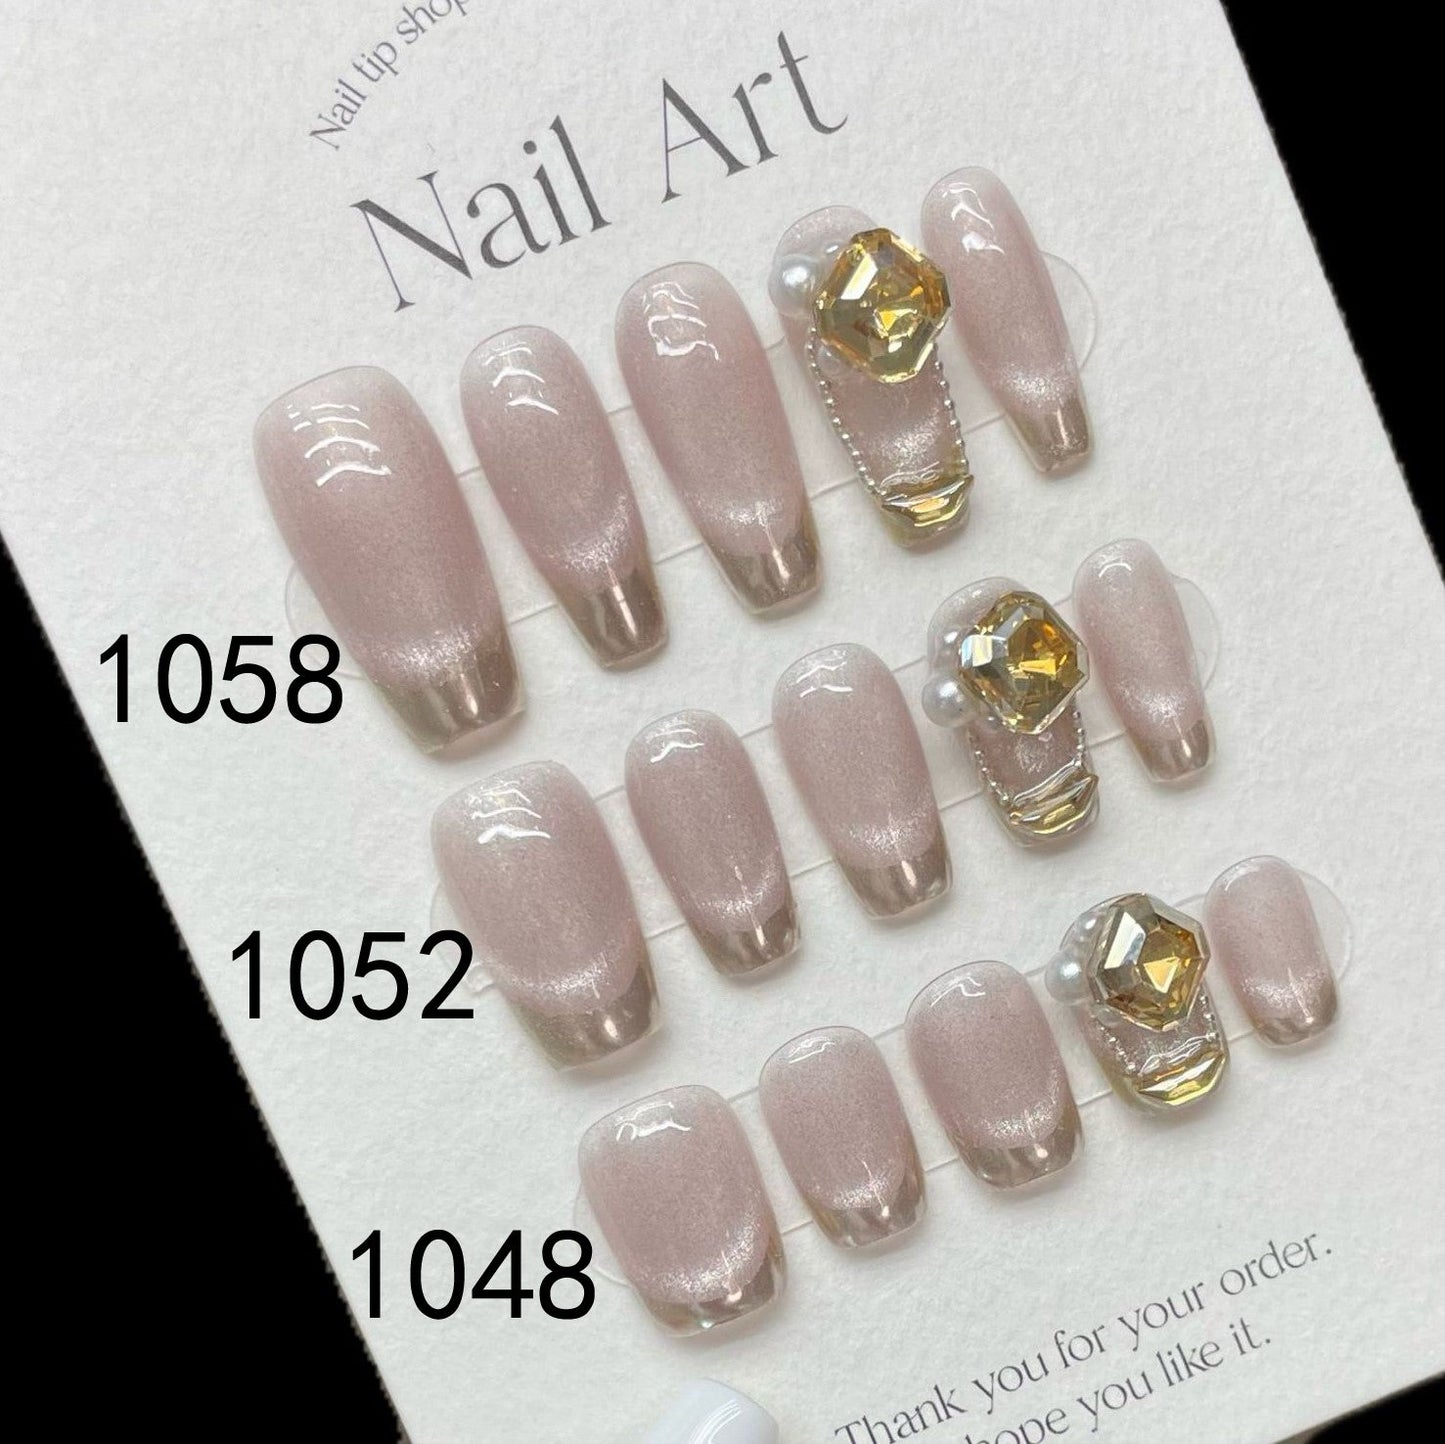 1048/1052/1058 French Cat's Eye  Effect press on nails 100% handmade false nails pink nude color